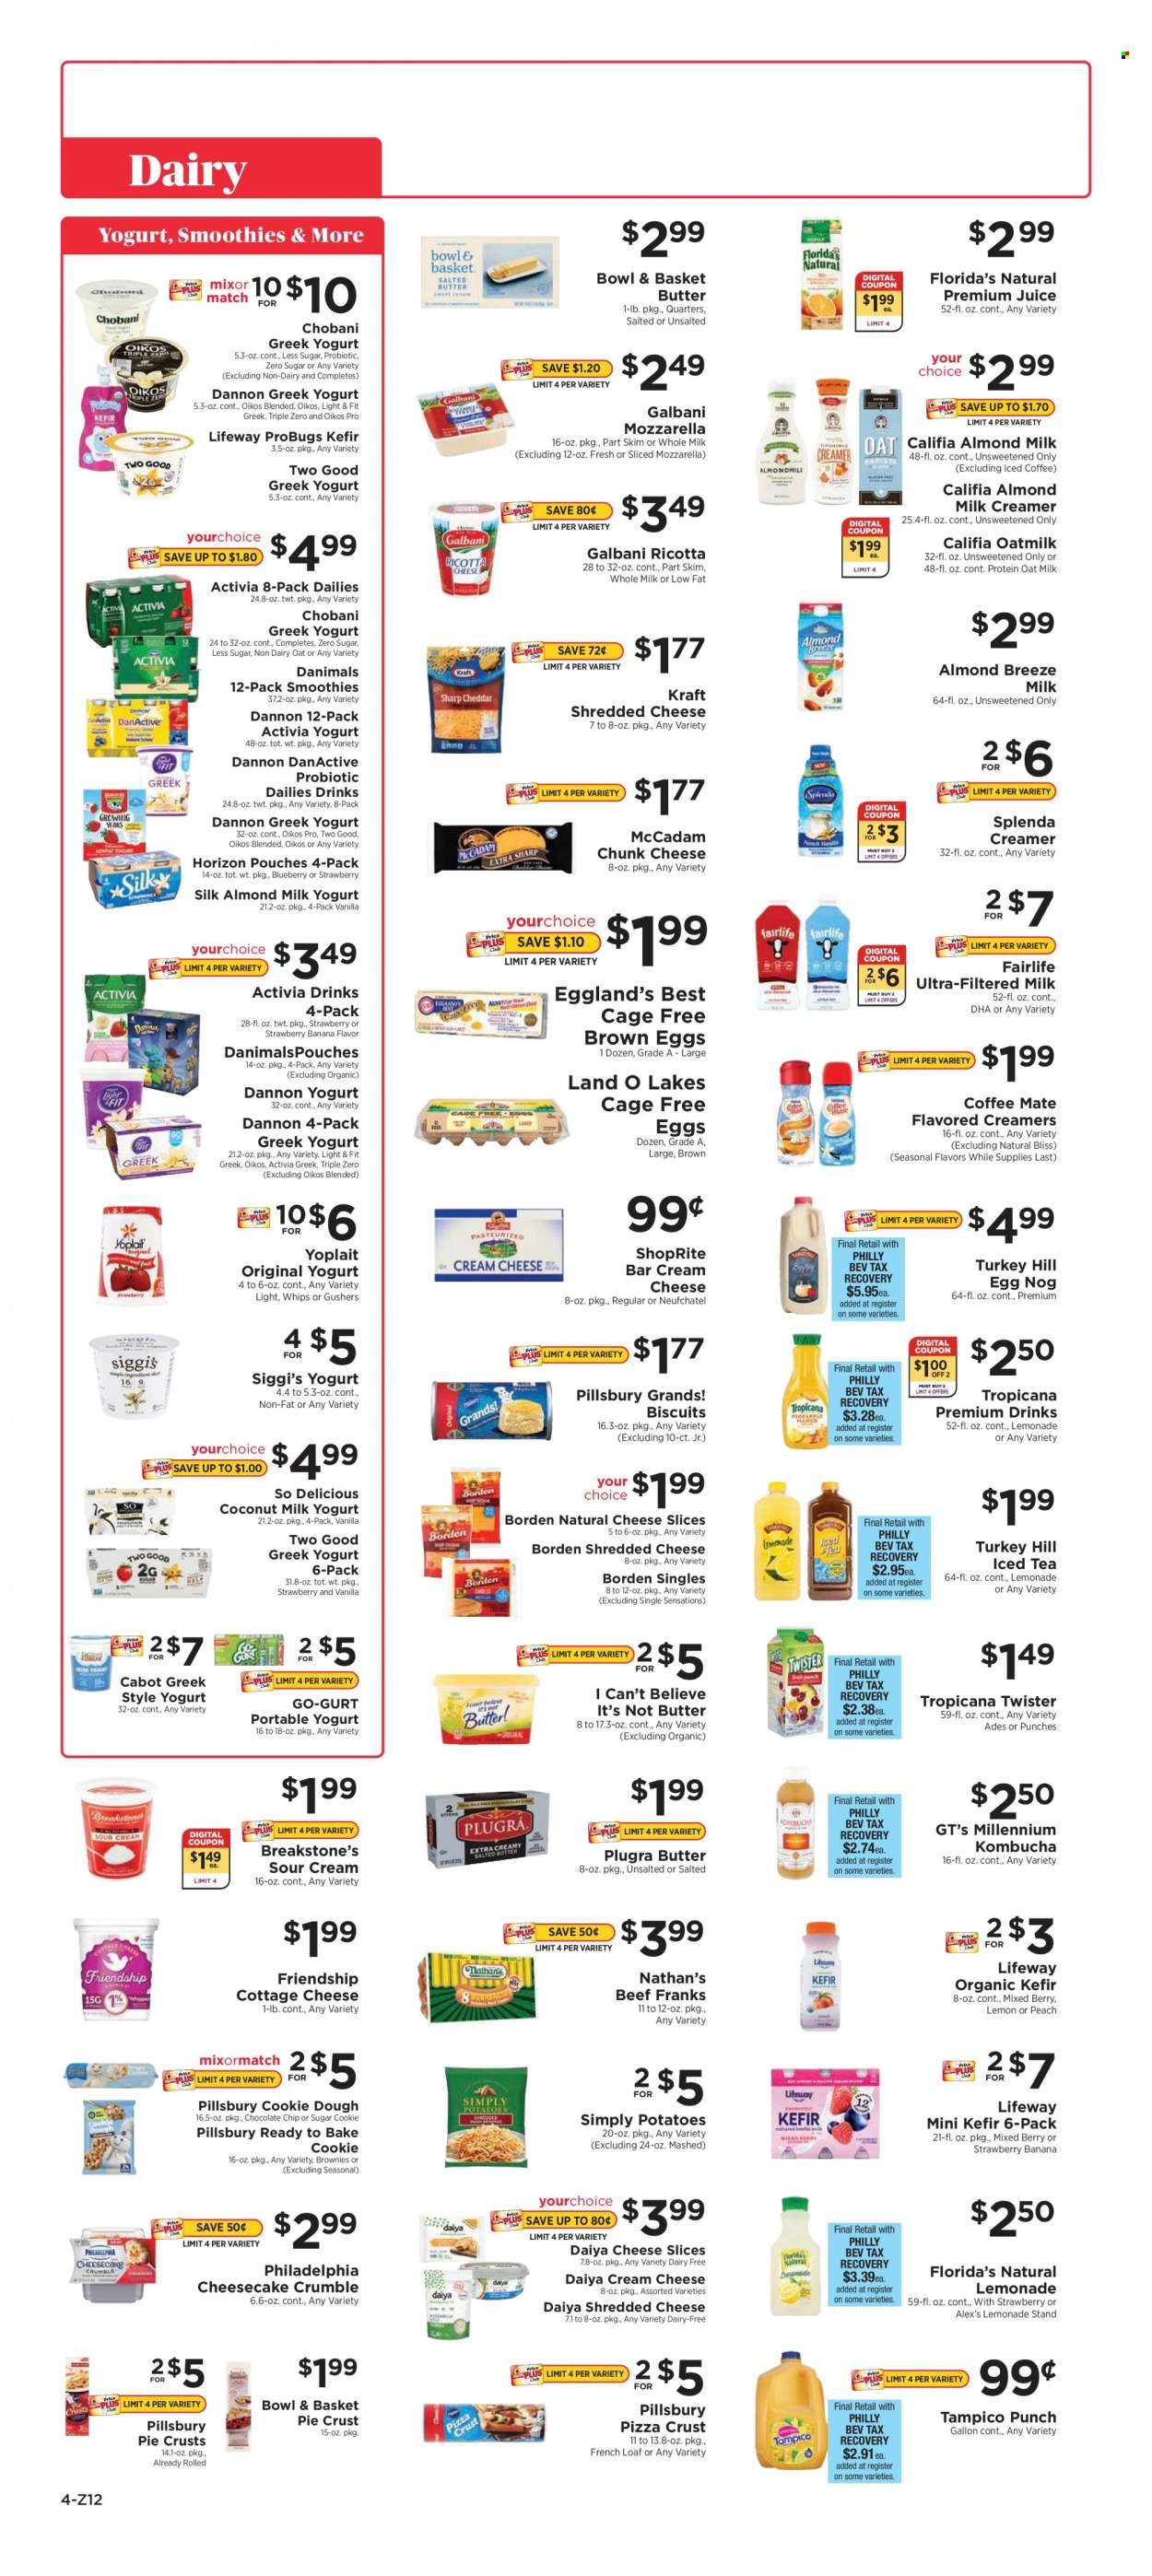 thumbnail - ShopRite Flyer - 12/12/2021 - 12/18/2021 - Sales products - Bowl & Basket, french loaf, brownies, potatoes, pizza, Pillsbury, Kraft®, cottage cheese, cream cheese, Neufchâtel, ricotta, shredded cheese, sliced cheese, Philadelphia, Galbani, chunk cheese, greek yoghurt, yoghurt, Activia, Oikos, Yoplait, Chobani, Dannon, Danimals, Almond Breeze, oat milk, eggs, cage free eggs, butter, I Can't Believe It's Not Butter, sour cream, creamer, almond creamer, cookie dough, chocolate chips, biscuit, Florida's Natural, pie crust, coconut milk, lemonade, juice, ice tea, Tropicana Twister, fruit punch, smoothie, kombucha. Page 4.